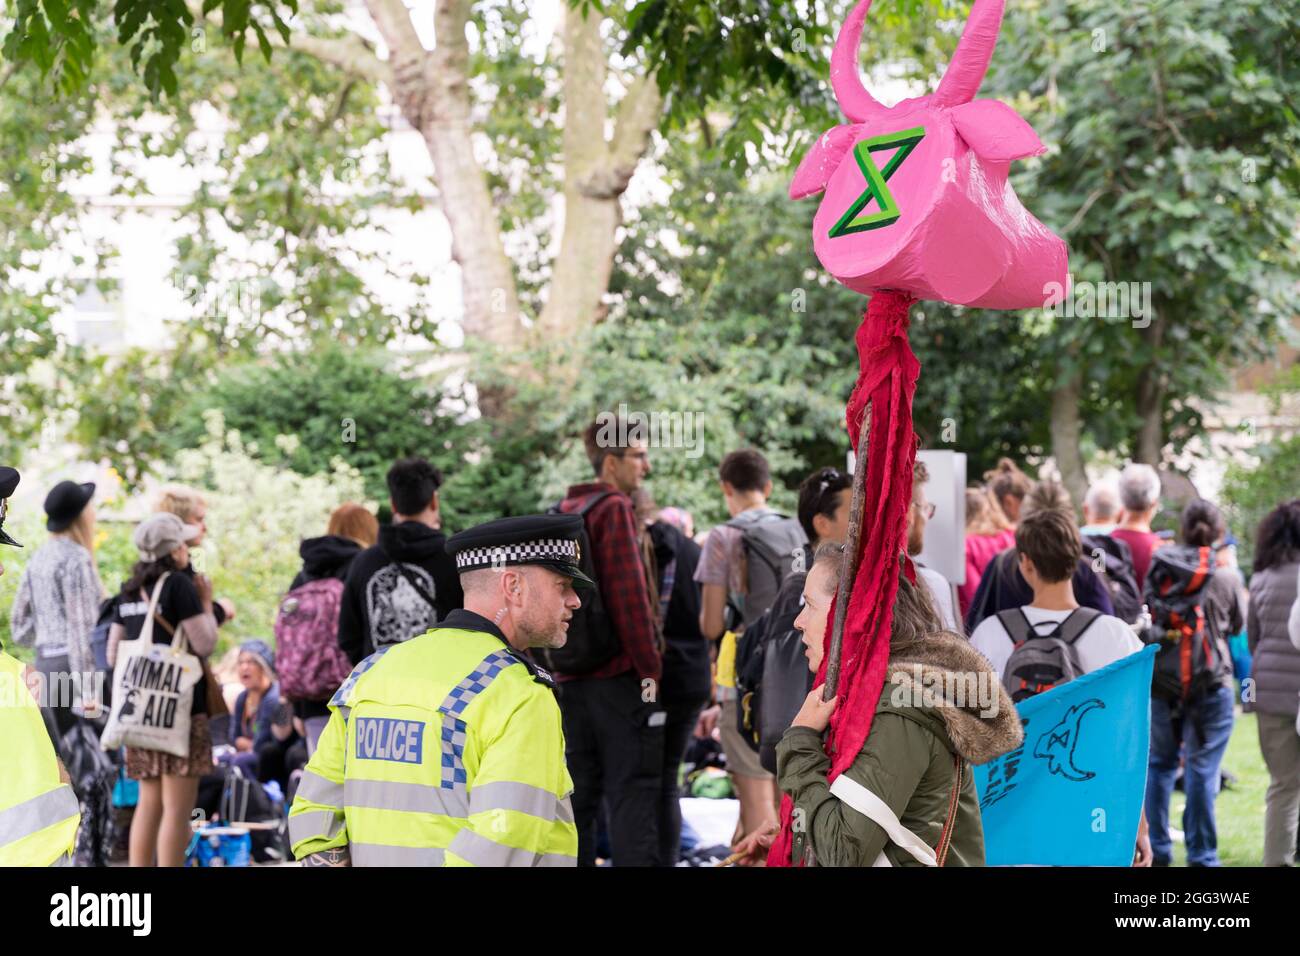 London, UK. 28th August 2021. Day 6,  The Impossible Rebellion continues, Extinction Rebellion (XR) joined Animal rebellion protesters at Smithsfield's market , central London, to demand government Act Now on the Climate Crisis and Ecological Emergency. Credit: Xiu Bao/Alamy Live News Stock Photo